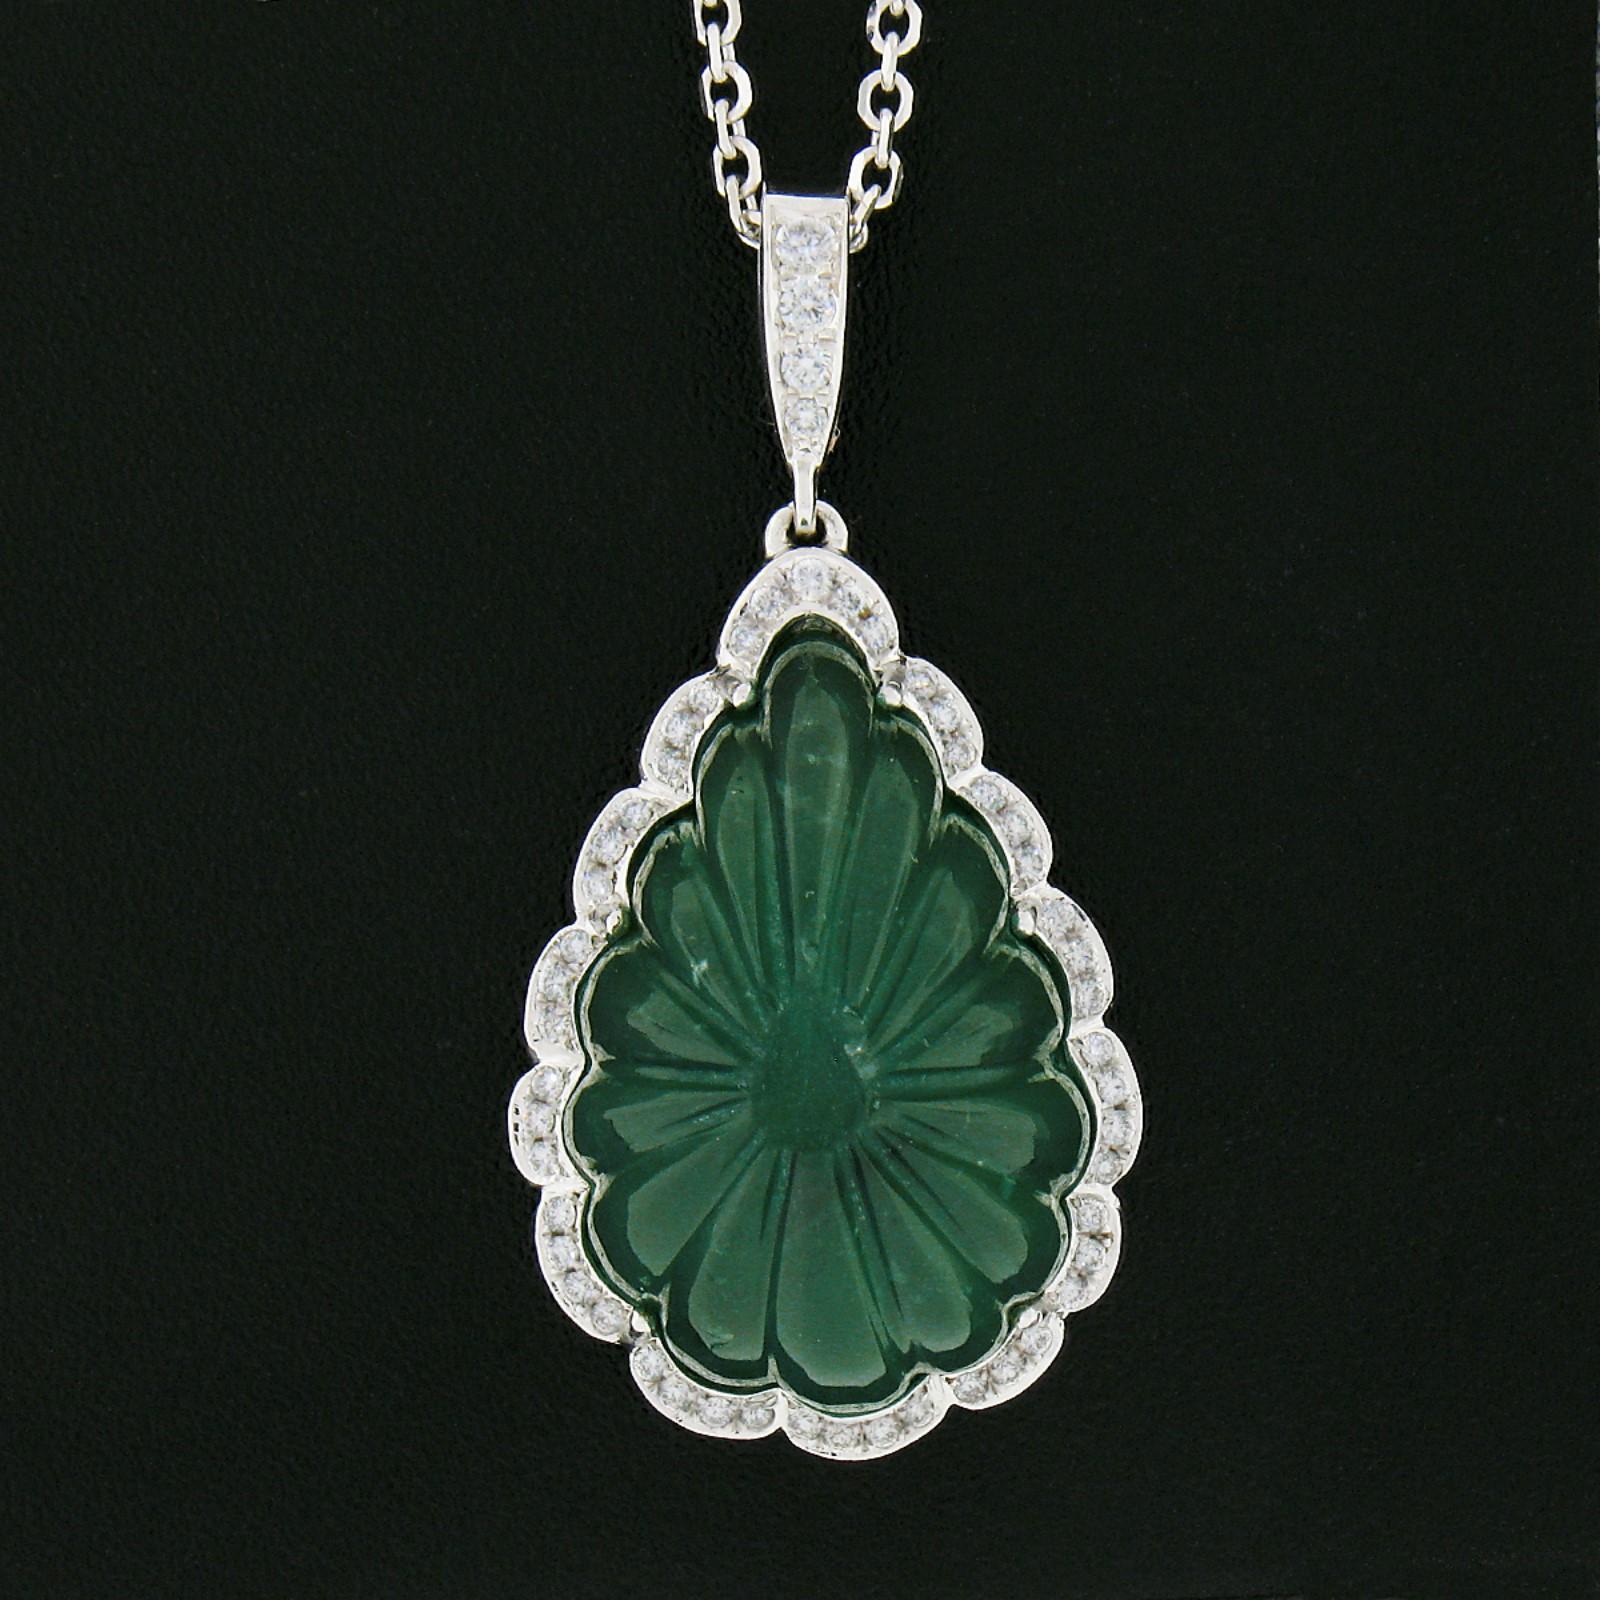 New 18k Gold GIA Carved Pear Cabochon Emerald Diamond Scalloped Pendant & Chain In New Condition For Sale In Montclair, NJ